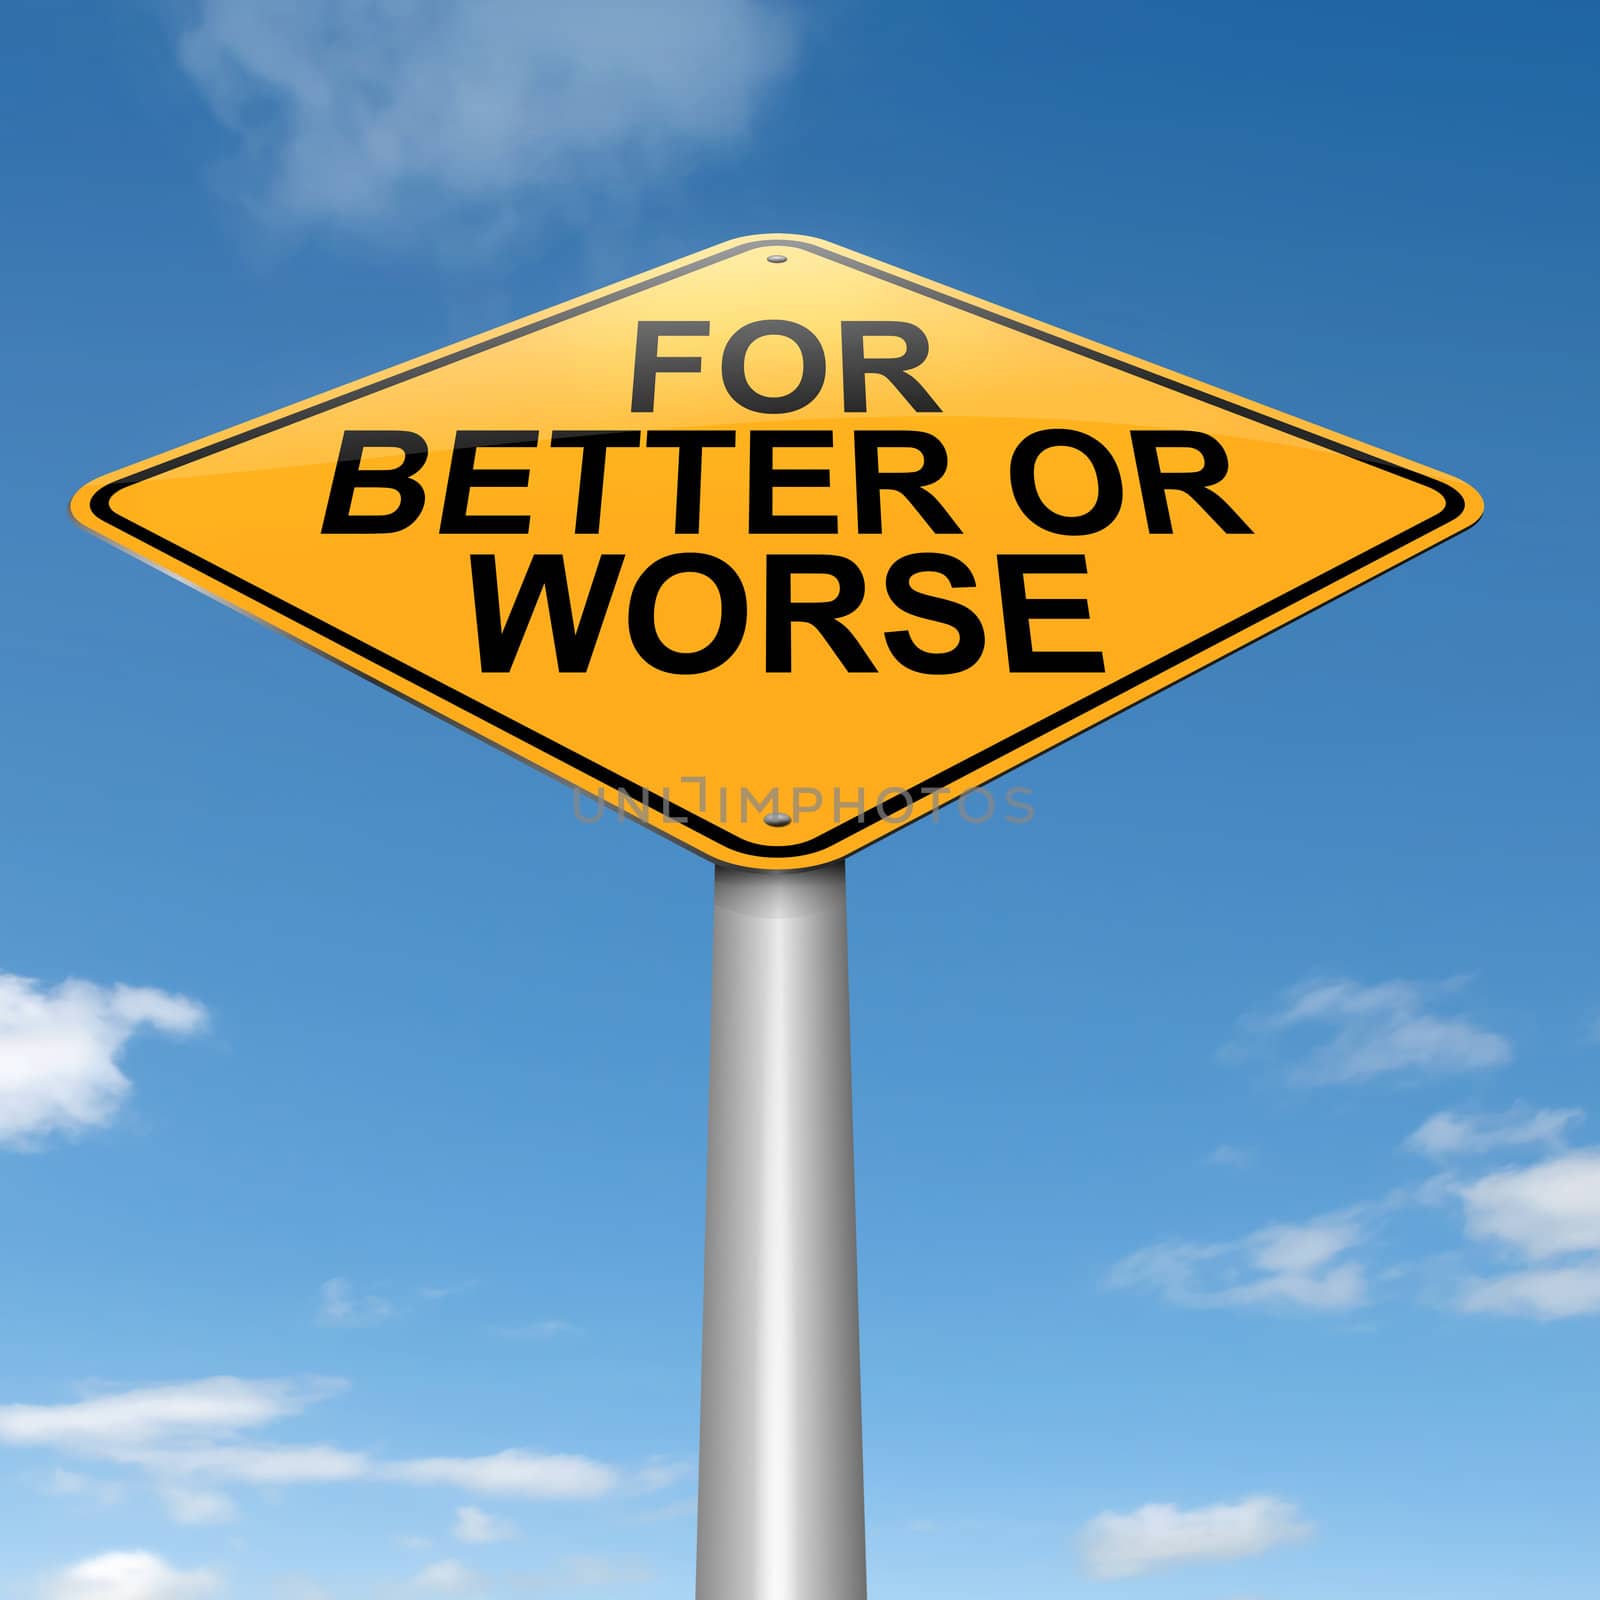 Illustration depicting a roadsign with a for better or worse concept. Sky background.